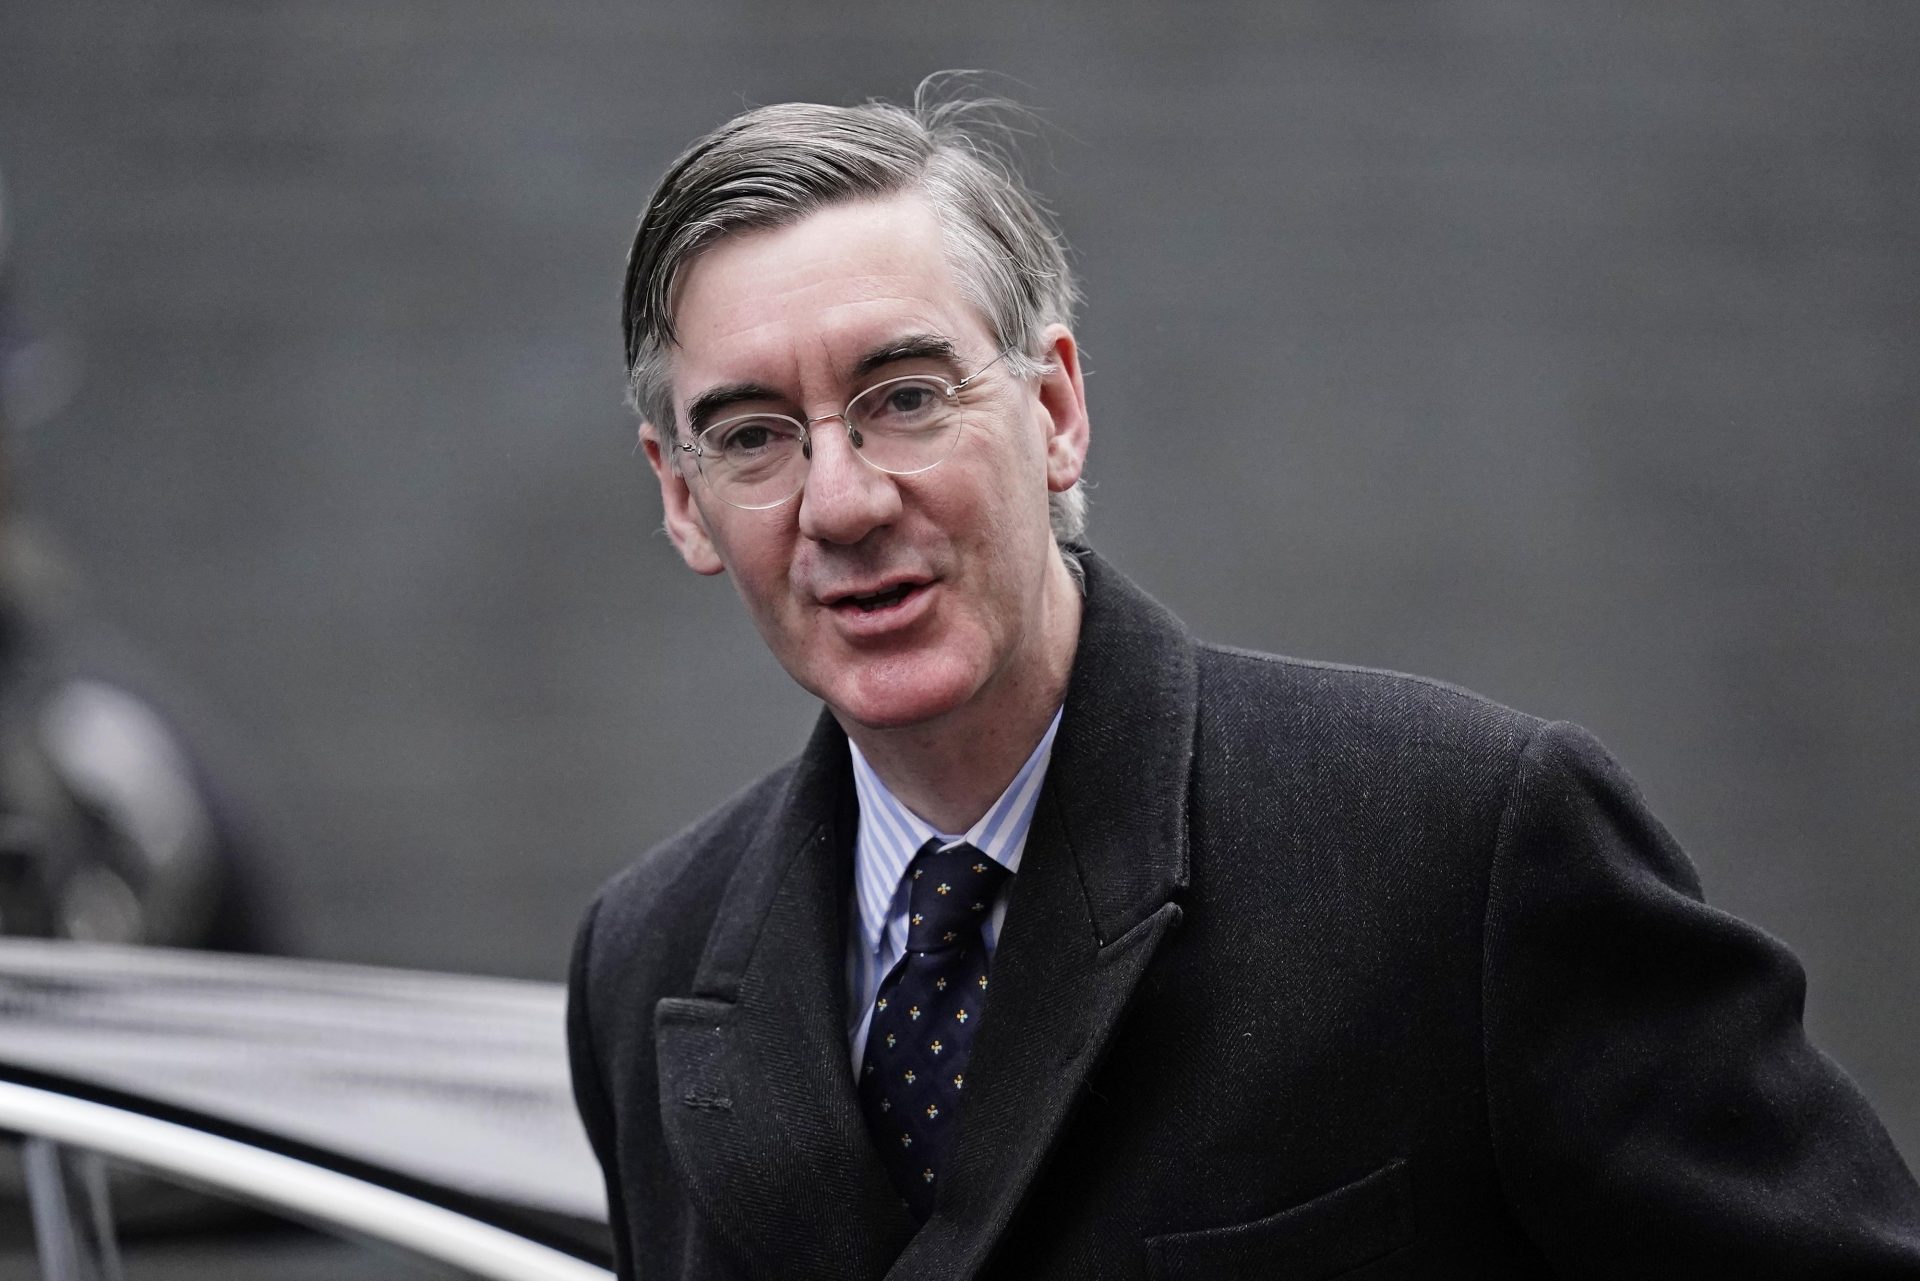 Leader of the House of Commons Jacob Rees-Mogg arrives in Downing Street. Photo: Aaron Chown/PA Wire/PA Images.